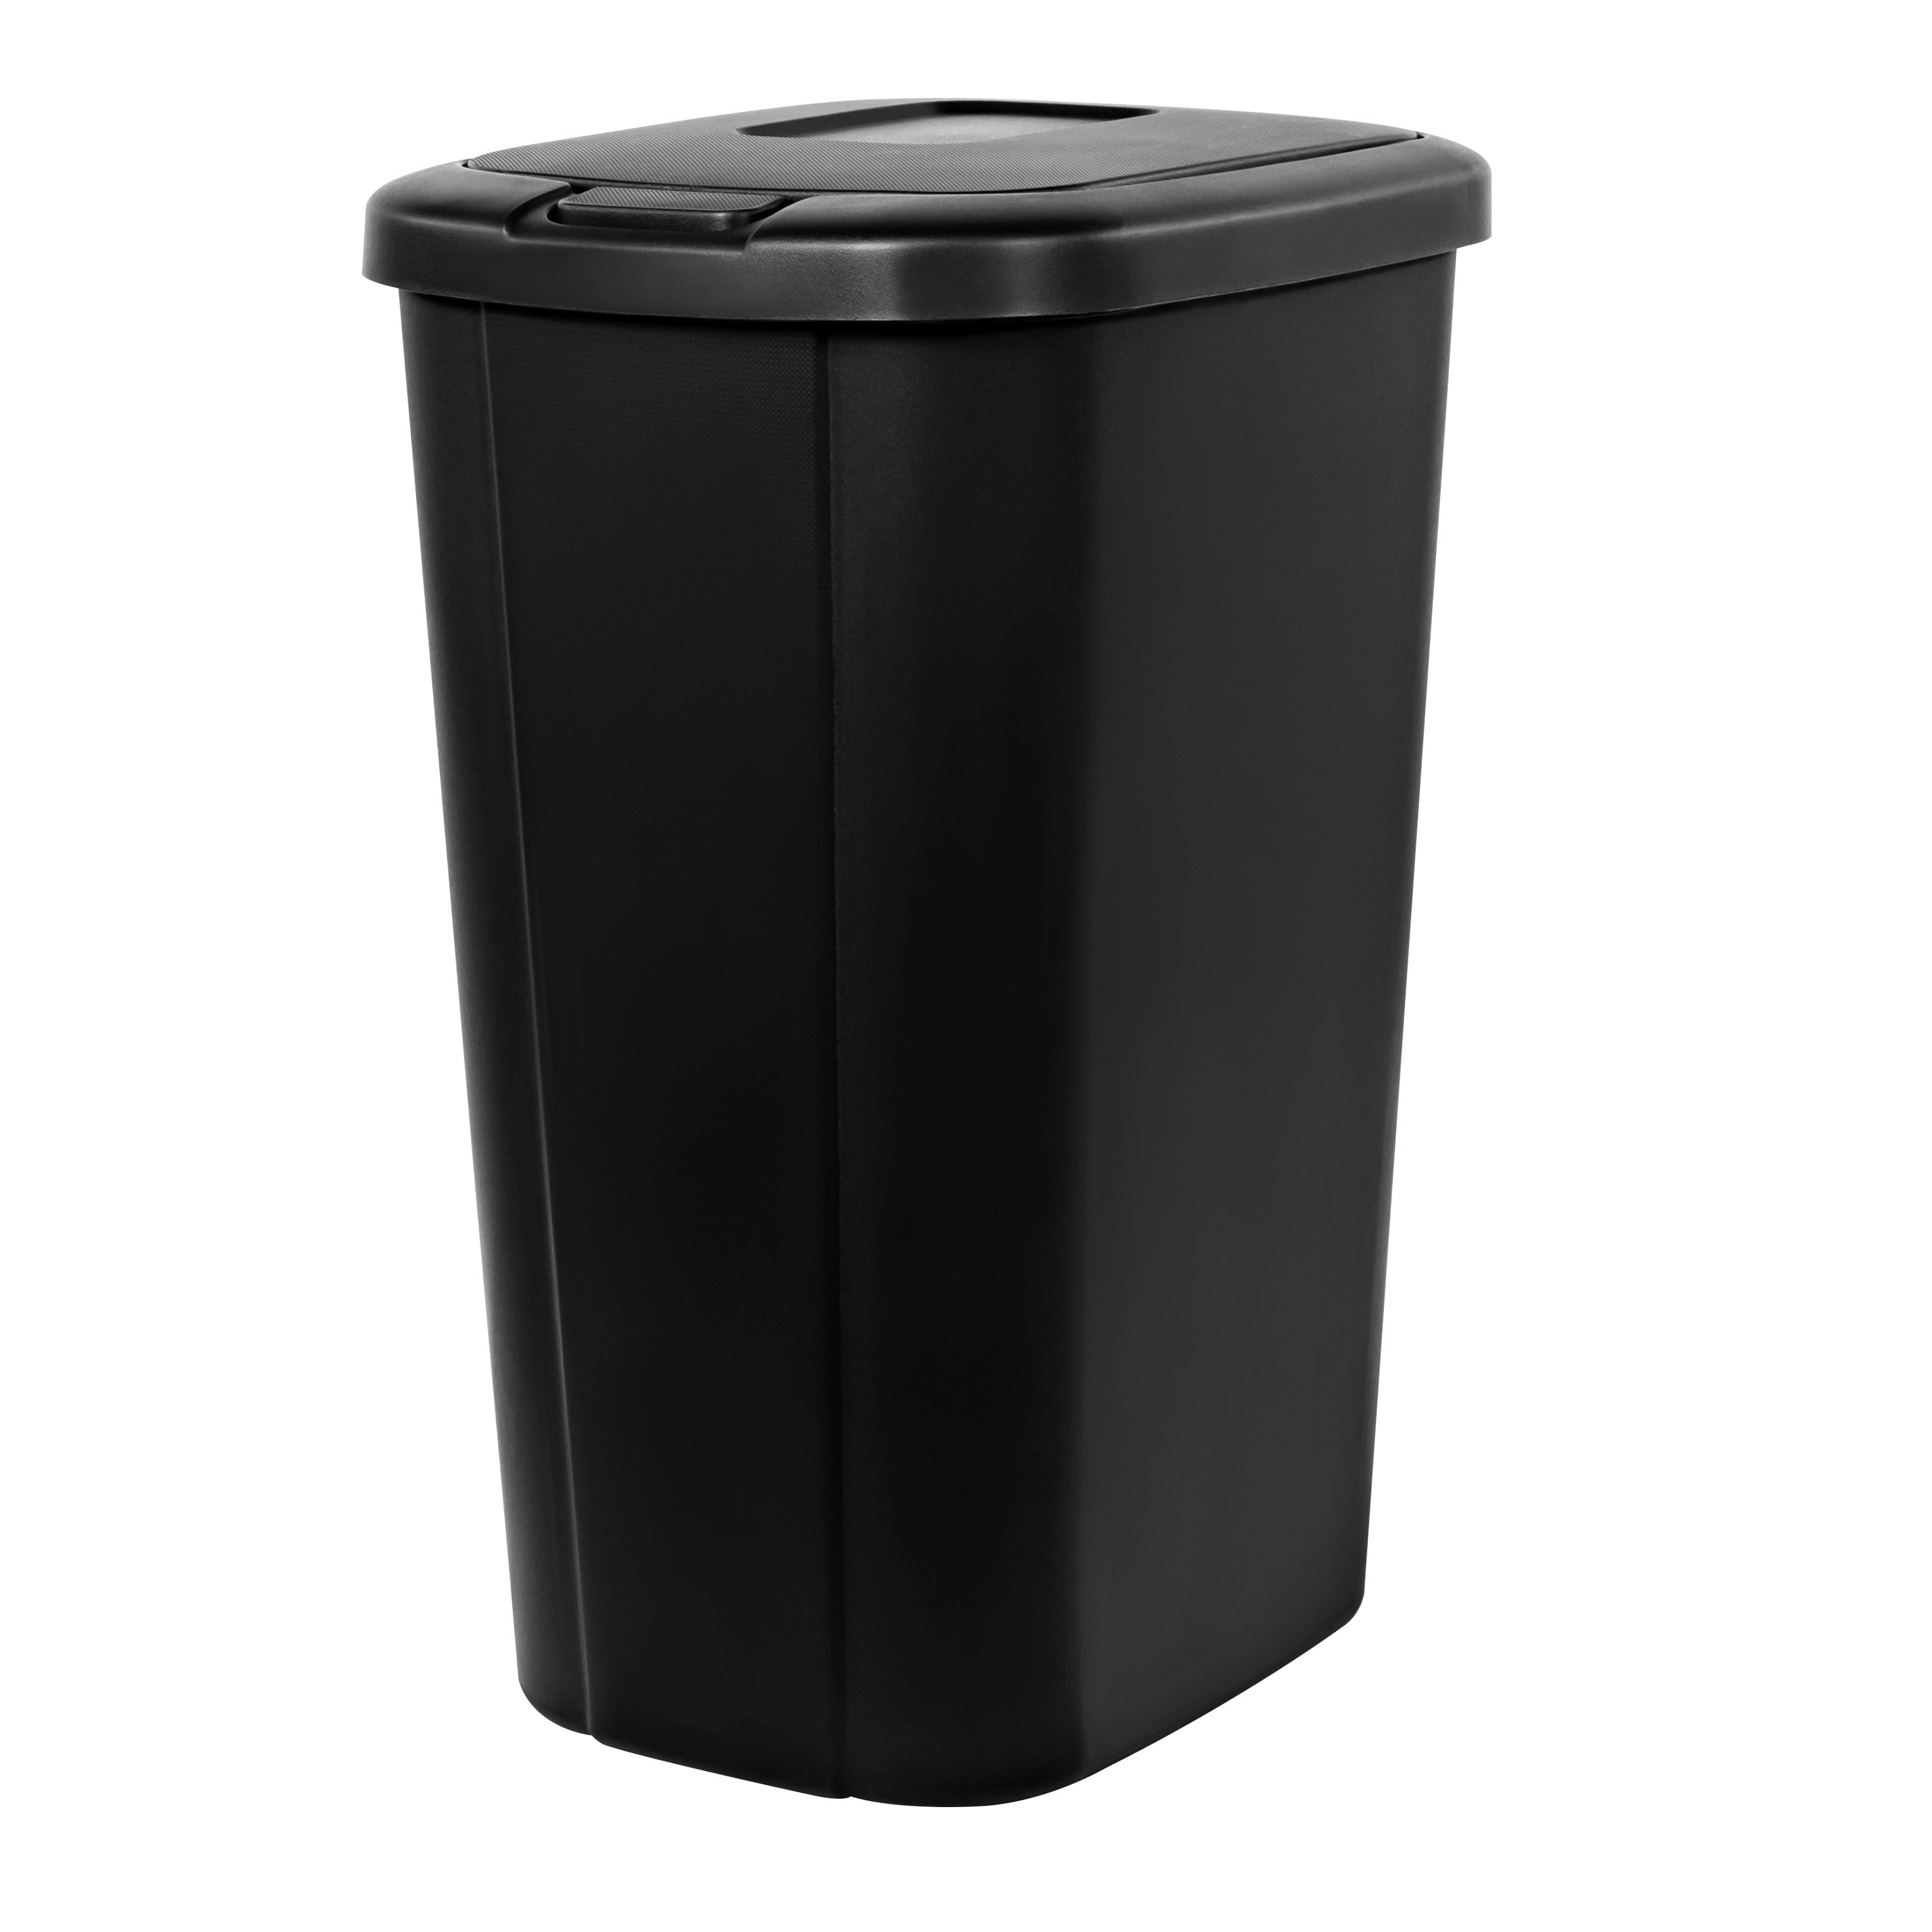 Hefty 13.3 Gallon Trash Can, Plastic Touch Top Kitchen Trash Can, Black - image 1 of 8